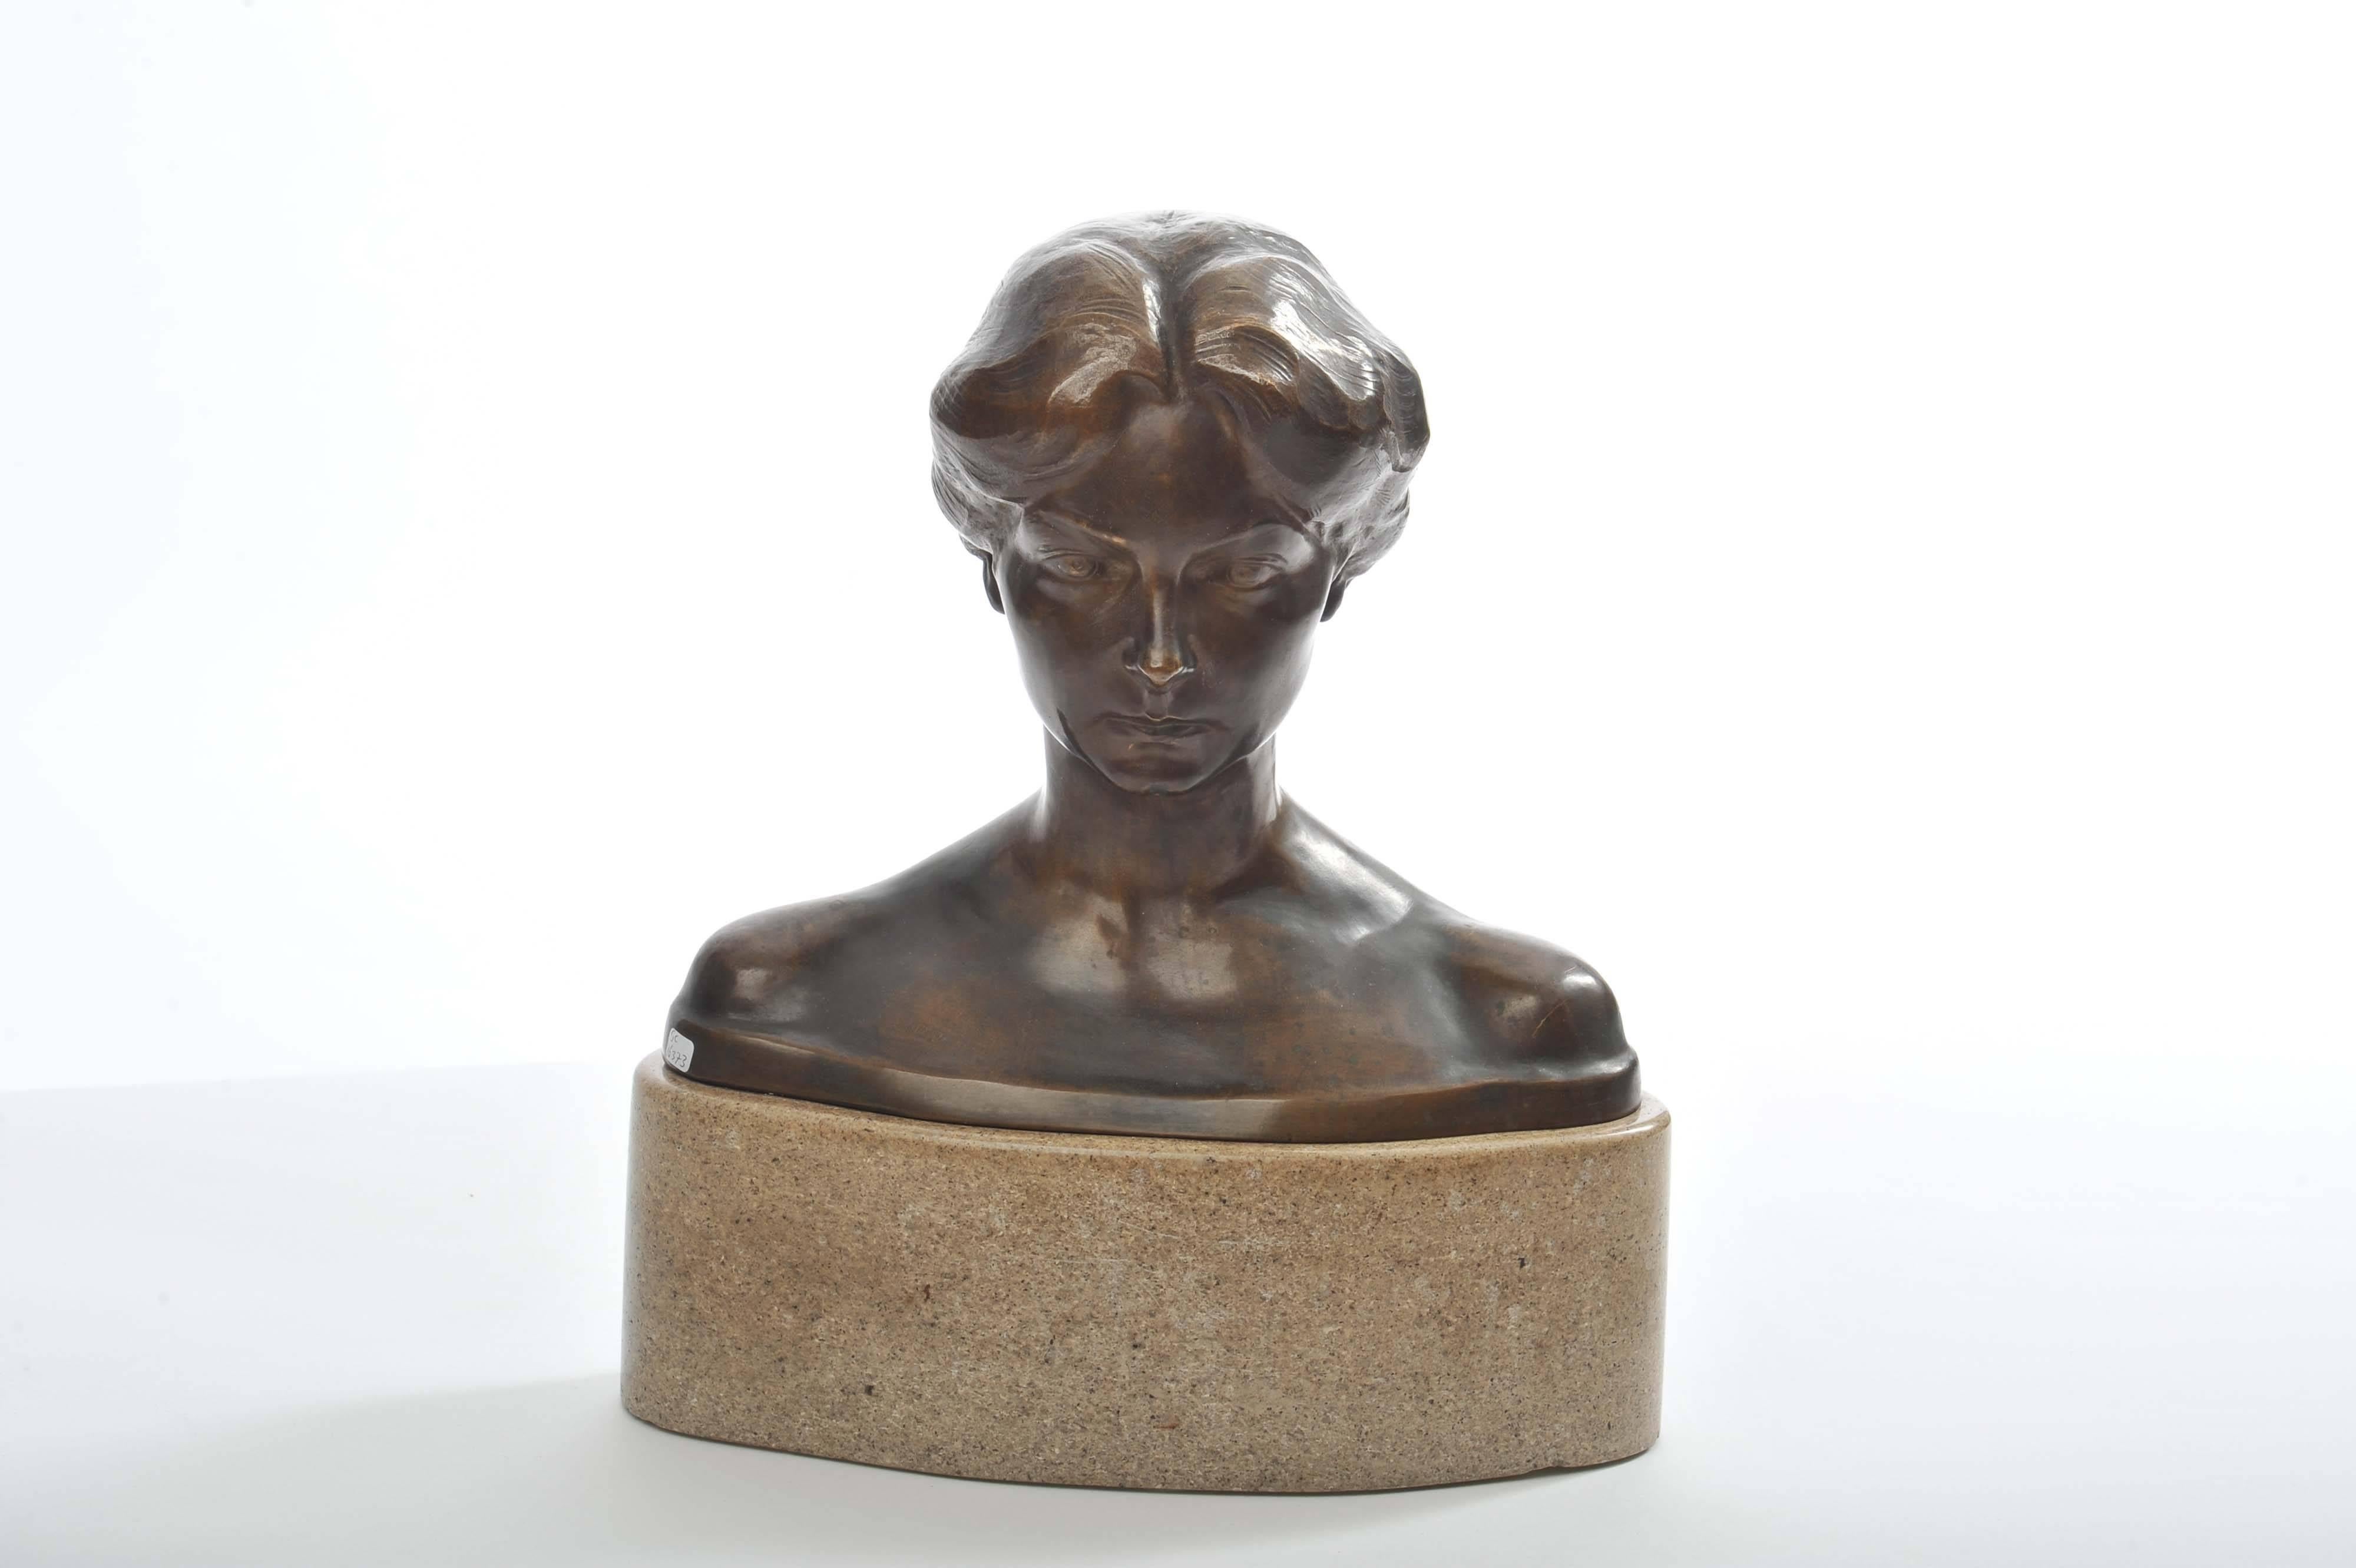 French bronze bust is placed on an oval granite base following the lines of the women's dress. The bronze has a good patina.
Signed Bory.